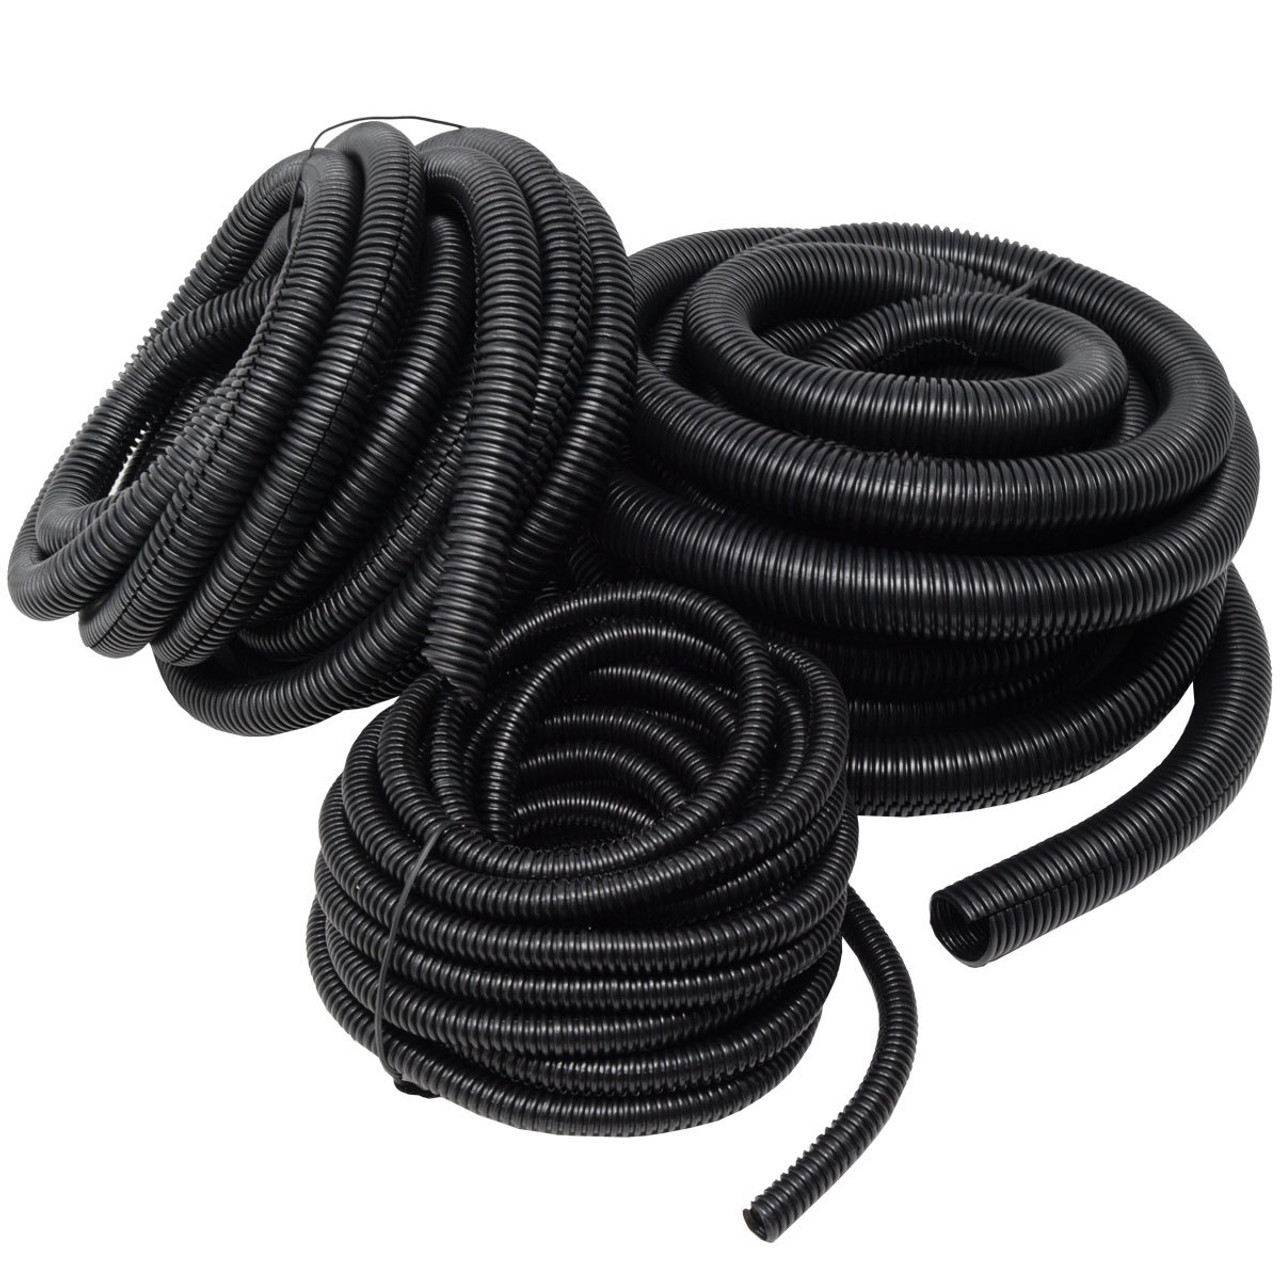 OHM Split Braided Cable Wrap Loom 1/8,1/4,3/8,1/2,3/4,1'' 5ft,10ft